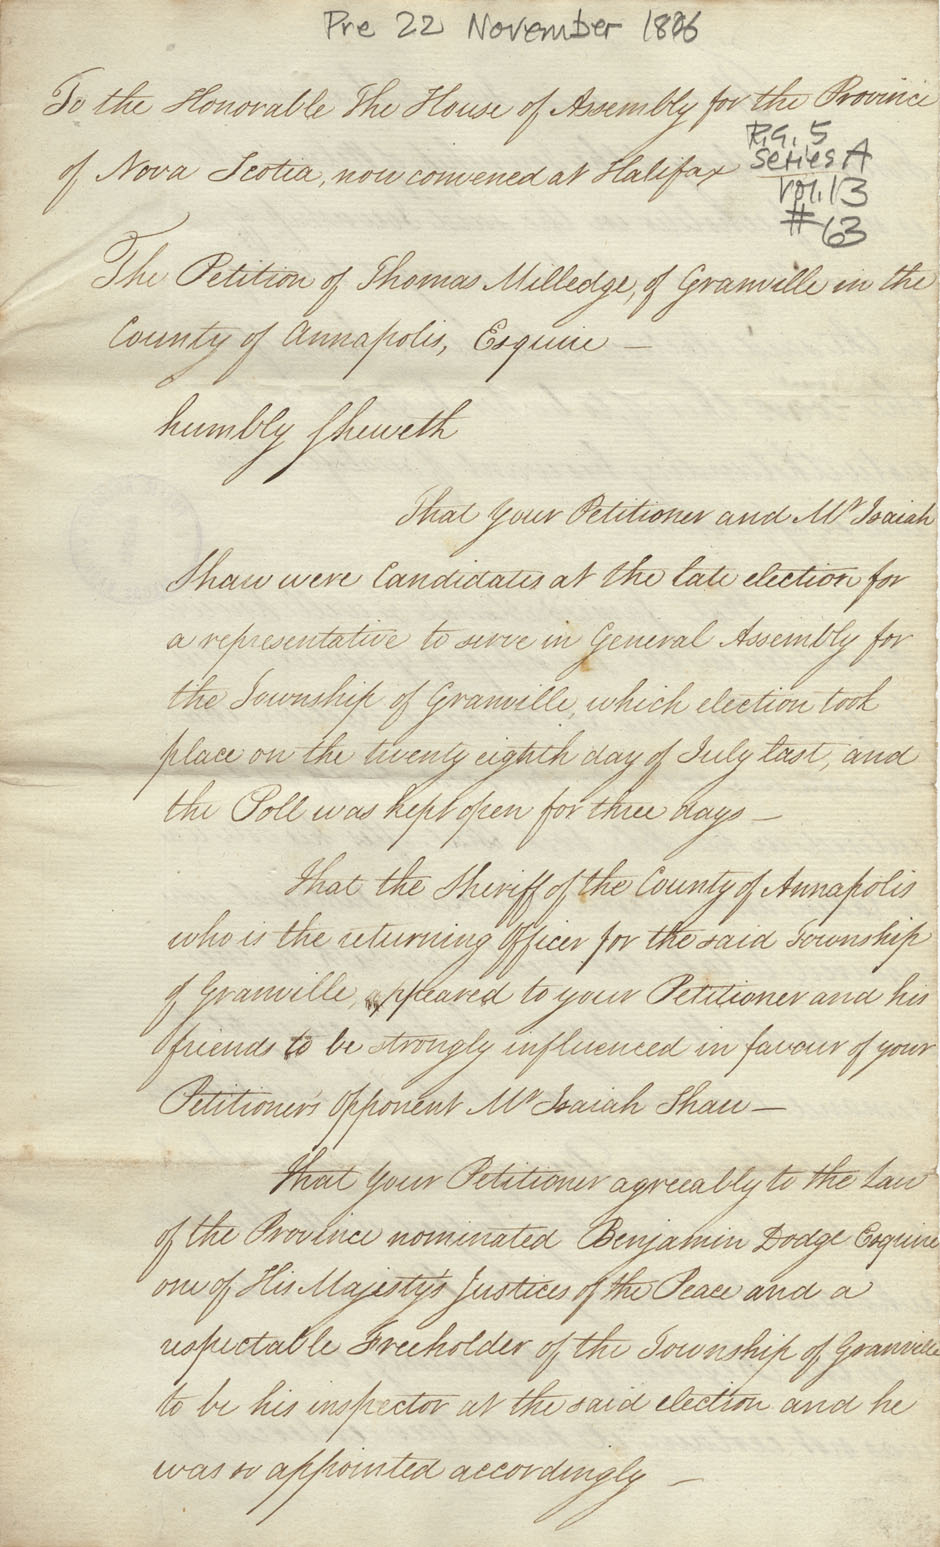 assembly : Petition of Thomas Milledge of Granville protesting against the election of Isaiah Shaw on the ground that several of those who voted for hi